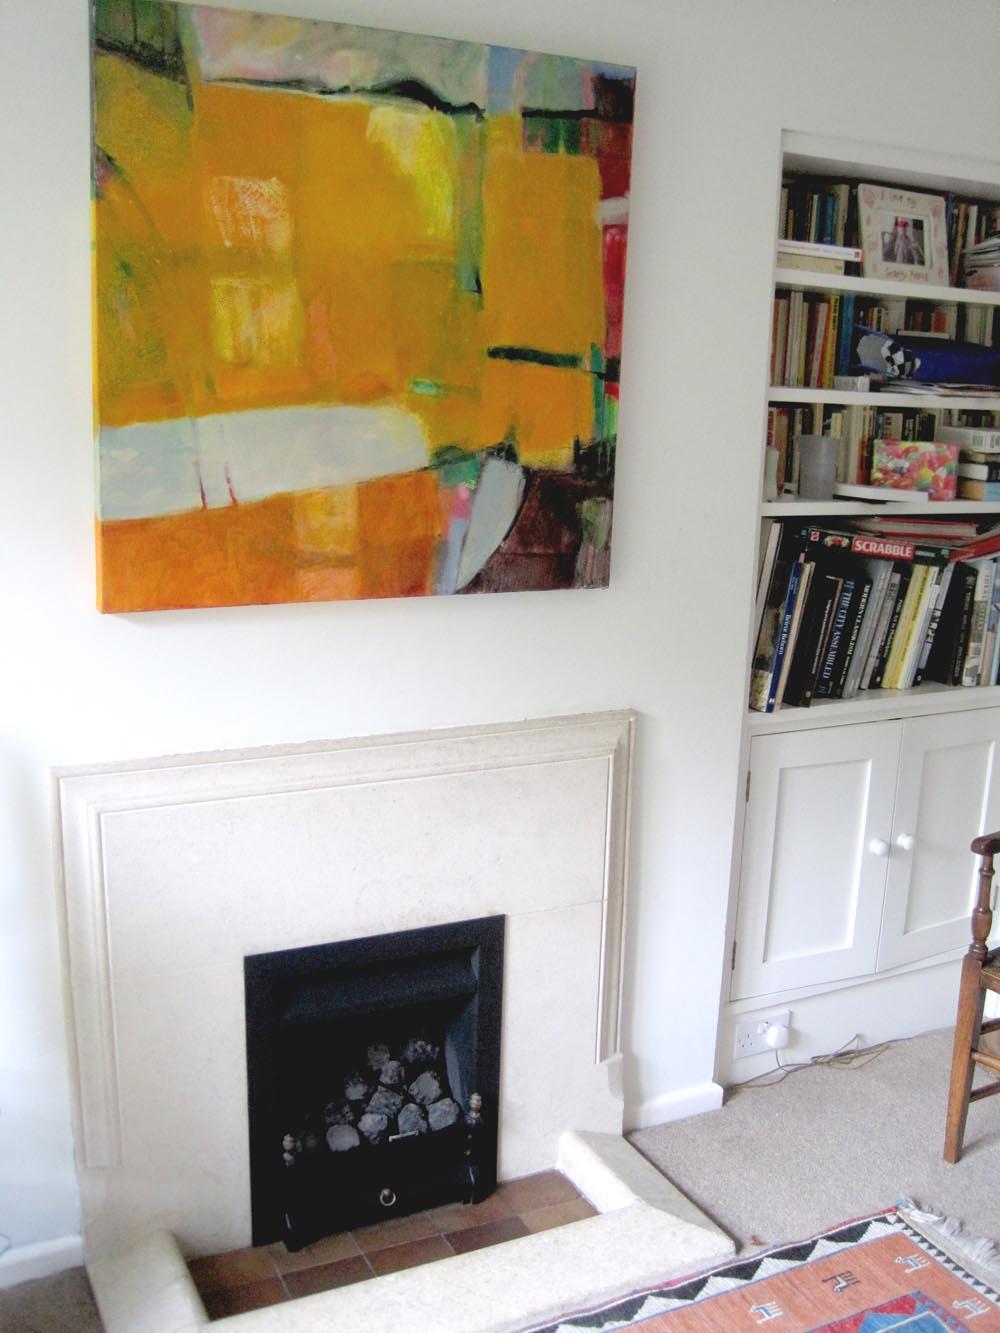 Kerala 5, The Beach, large abstract painting, orange, hints of green and red  - Painting by Jon Rowland